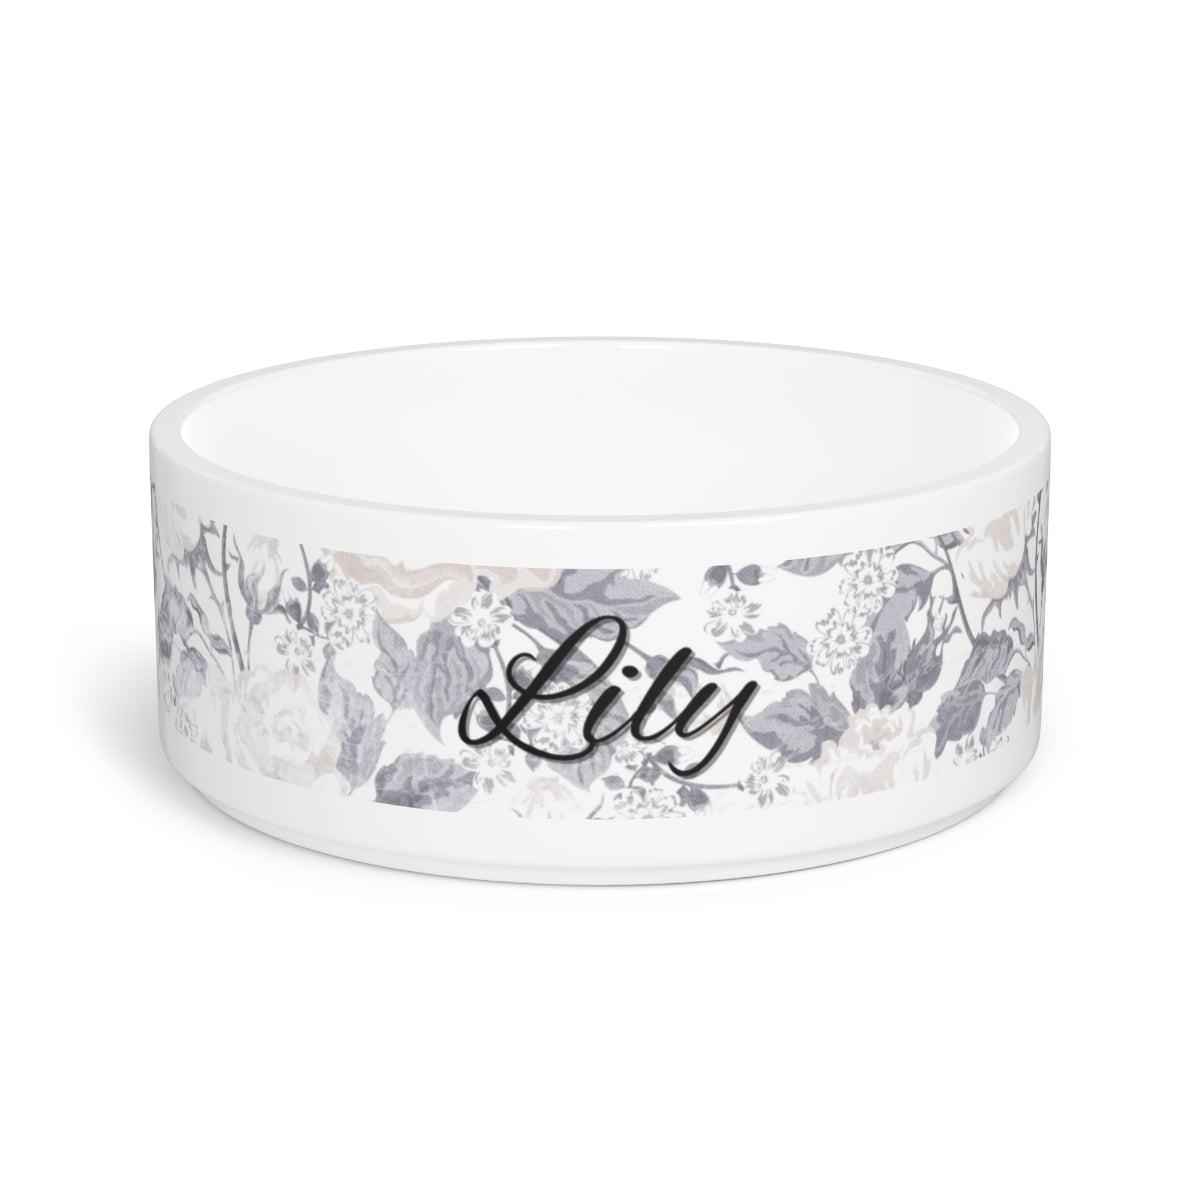 Floral Personalized Bunny Bowl